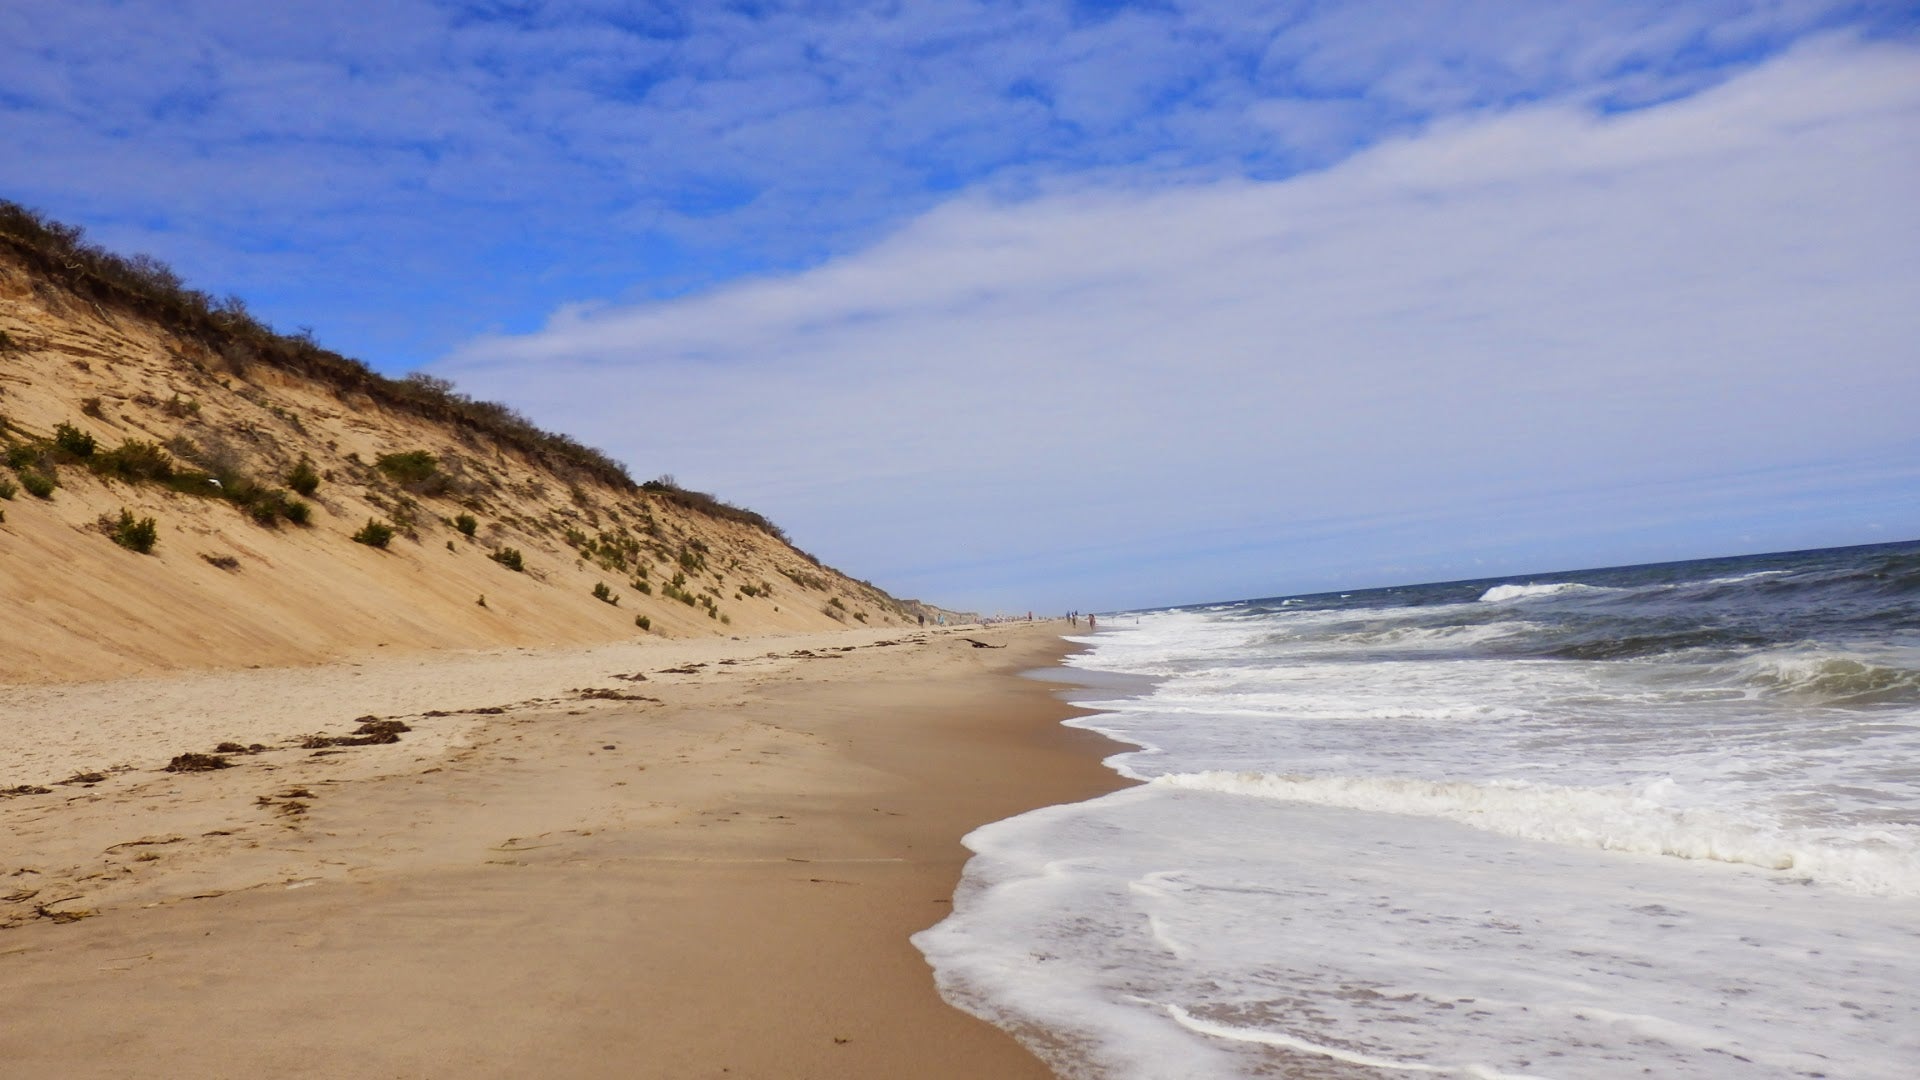 Head of the Meadow Beach Cape Cod National Seashore. Very close proximity to Campground.